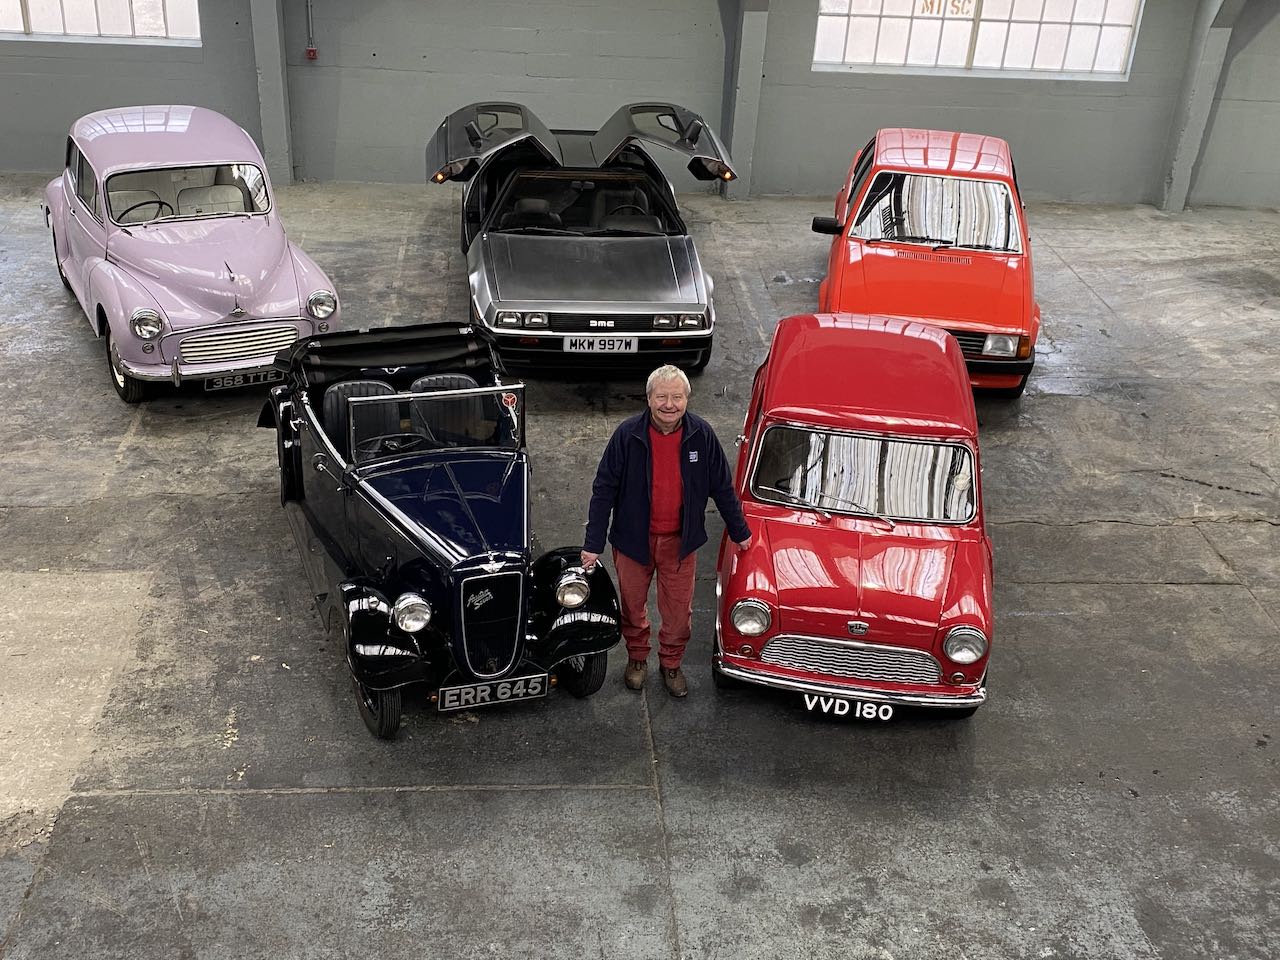 New classic car visitor centre Great British Car Journey to open this summer